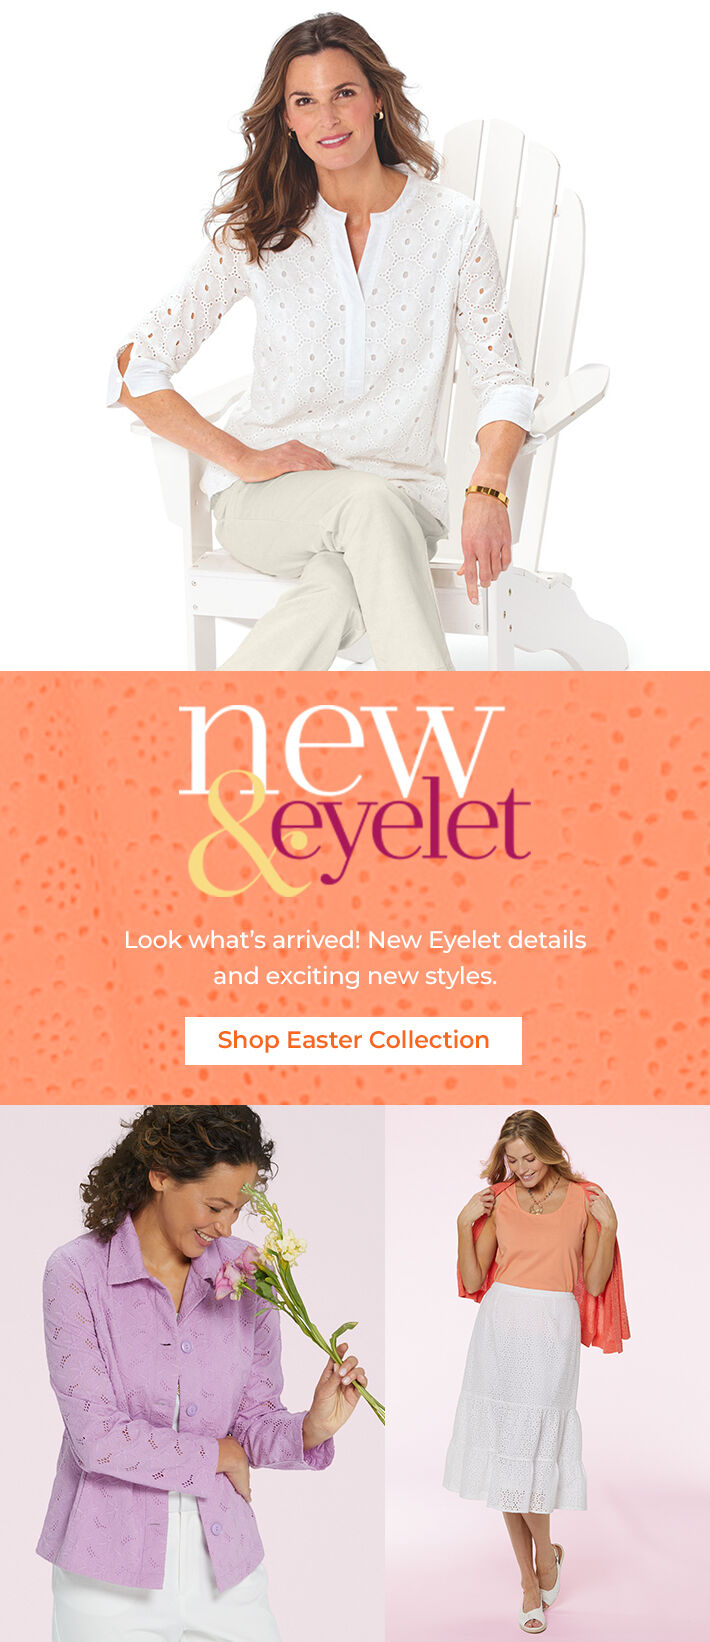 new & eyelet look what's arrived! new eyelet details and exciting new styles. shop easter collection